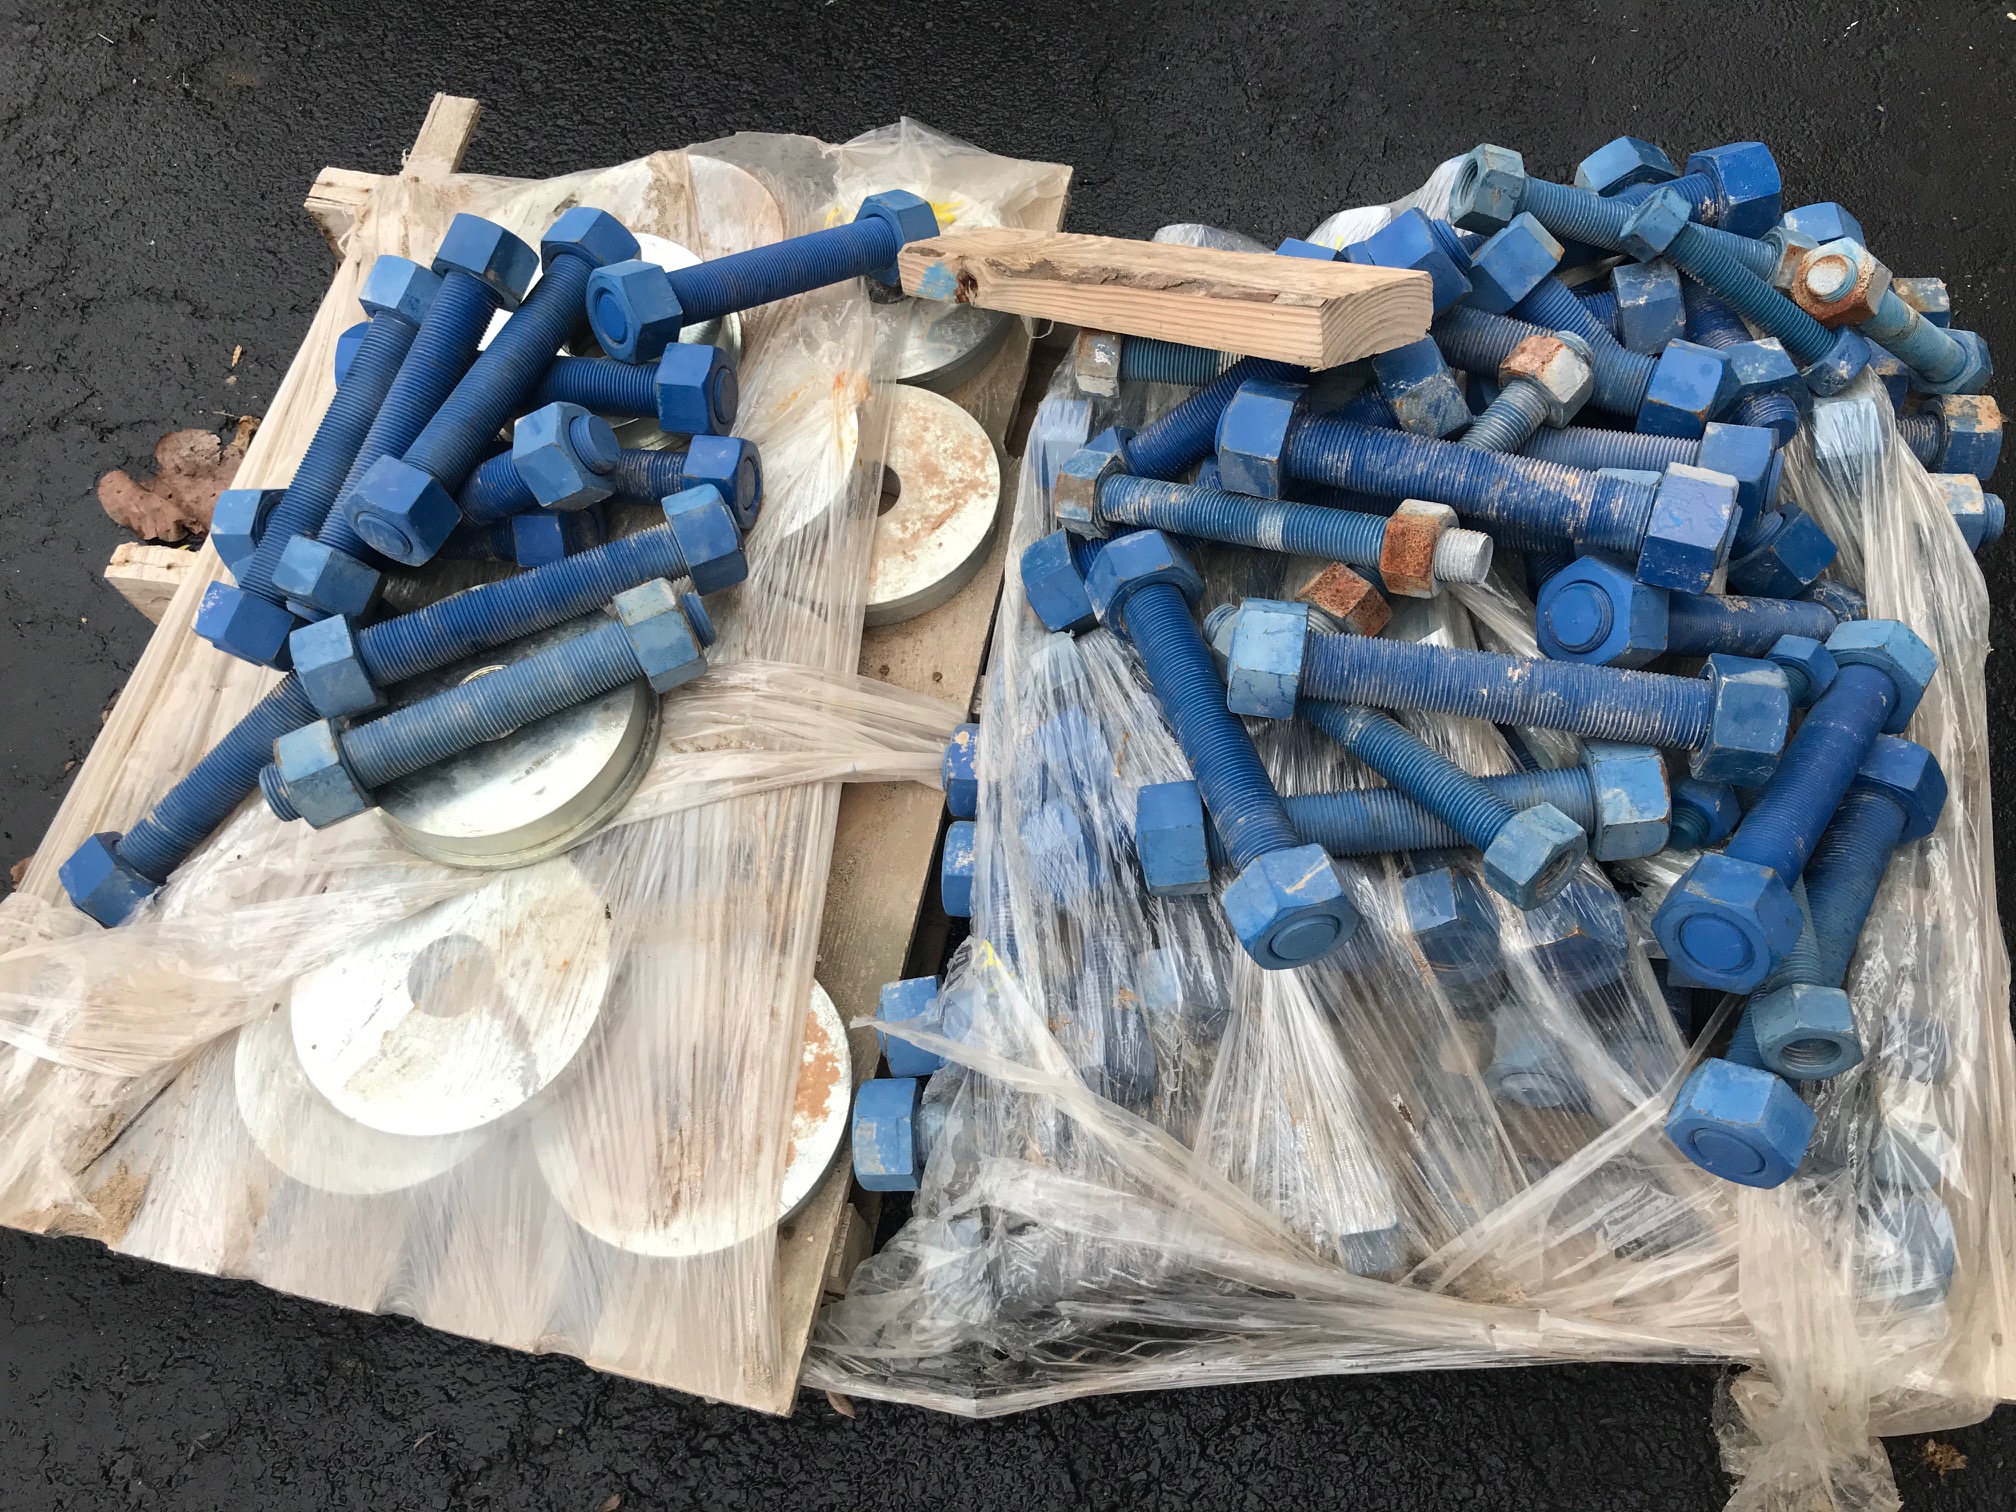 Pallet of blue bolts he took and didn't pay for